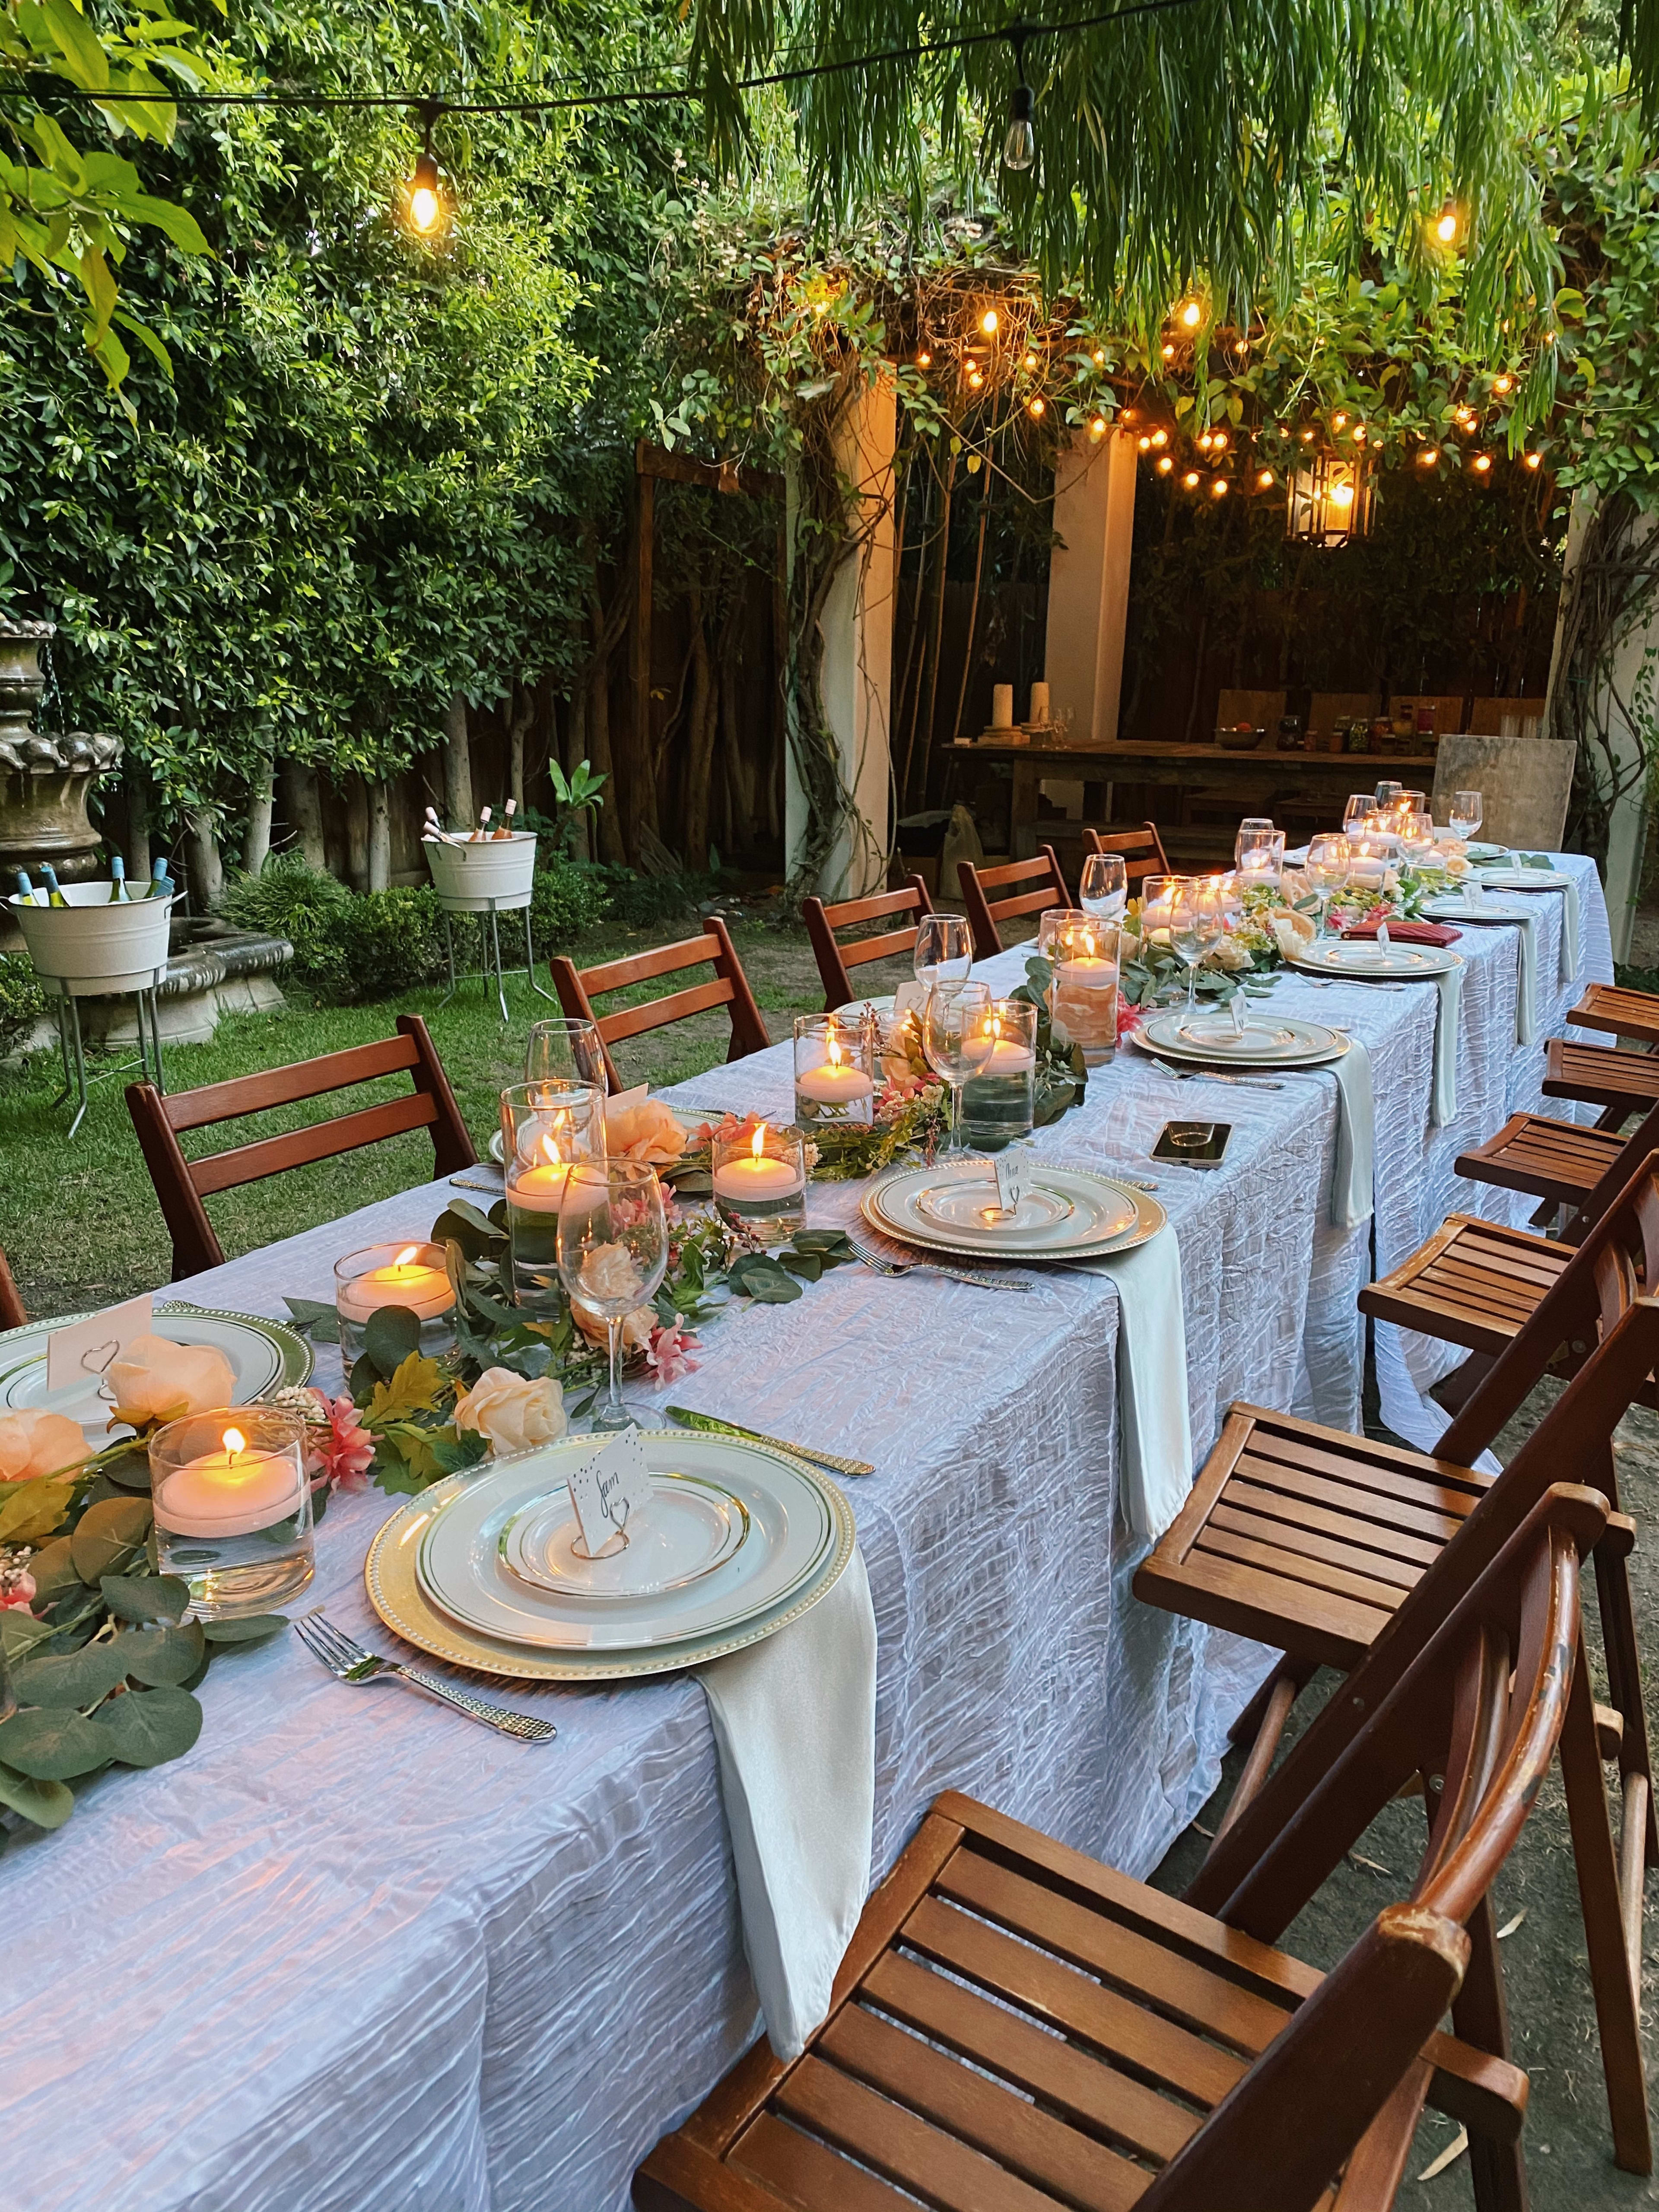 A garden table with candles and plates on it.